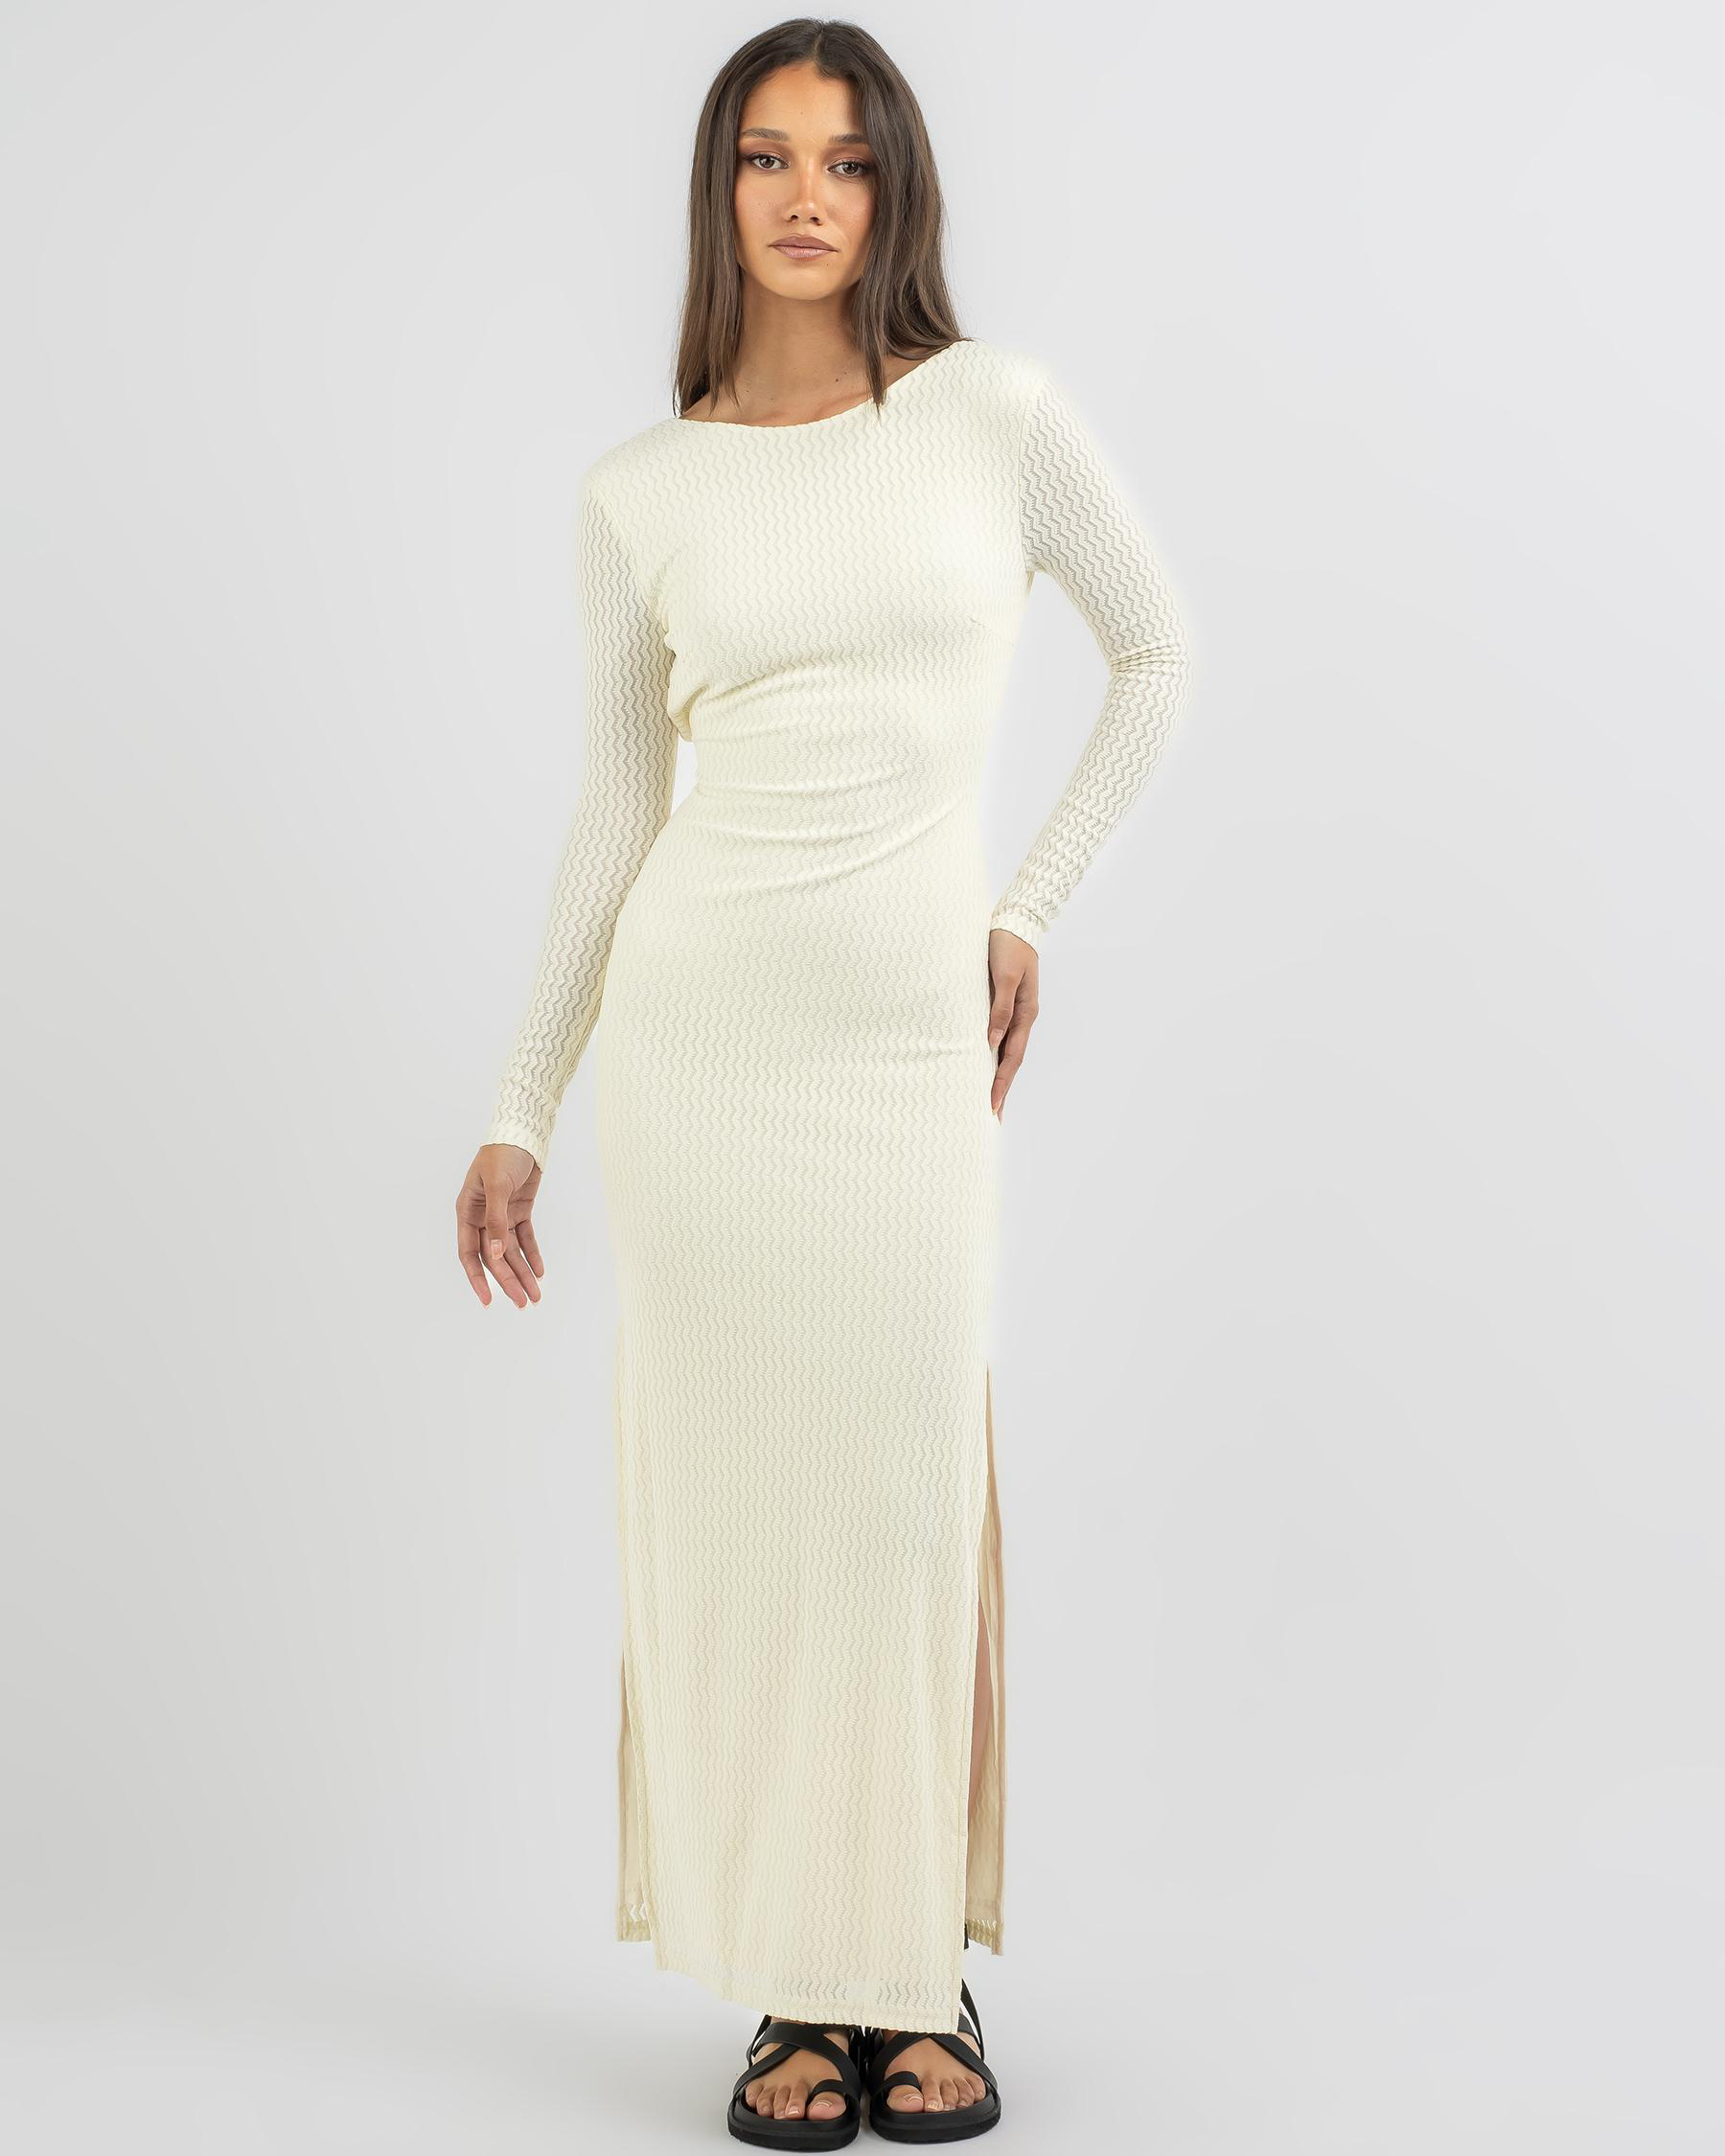 Shop Luvalot Kimberly Maxi Dress In Beige - Fast Shipping & Easy ...